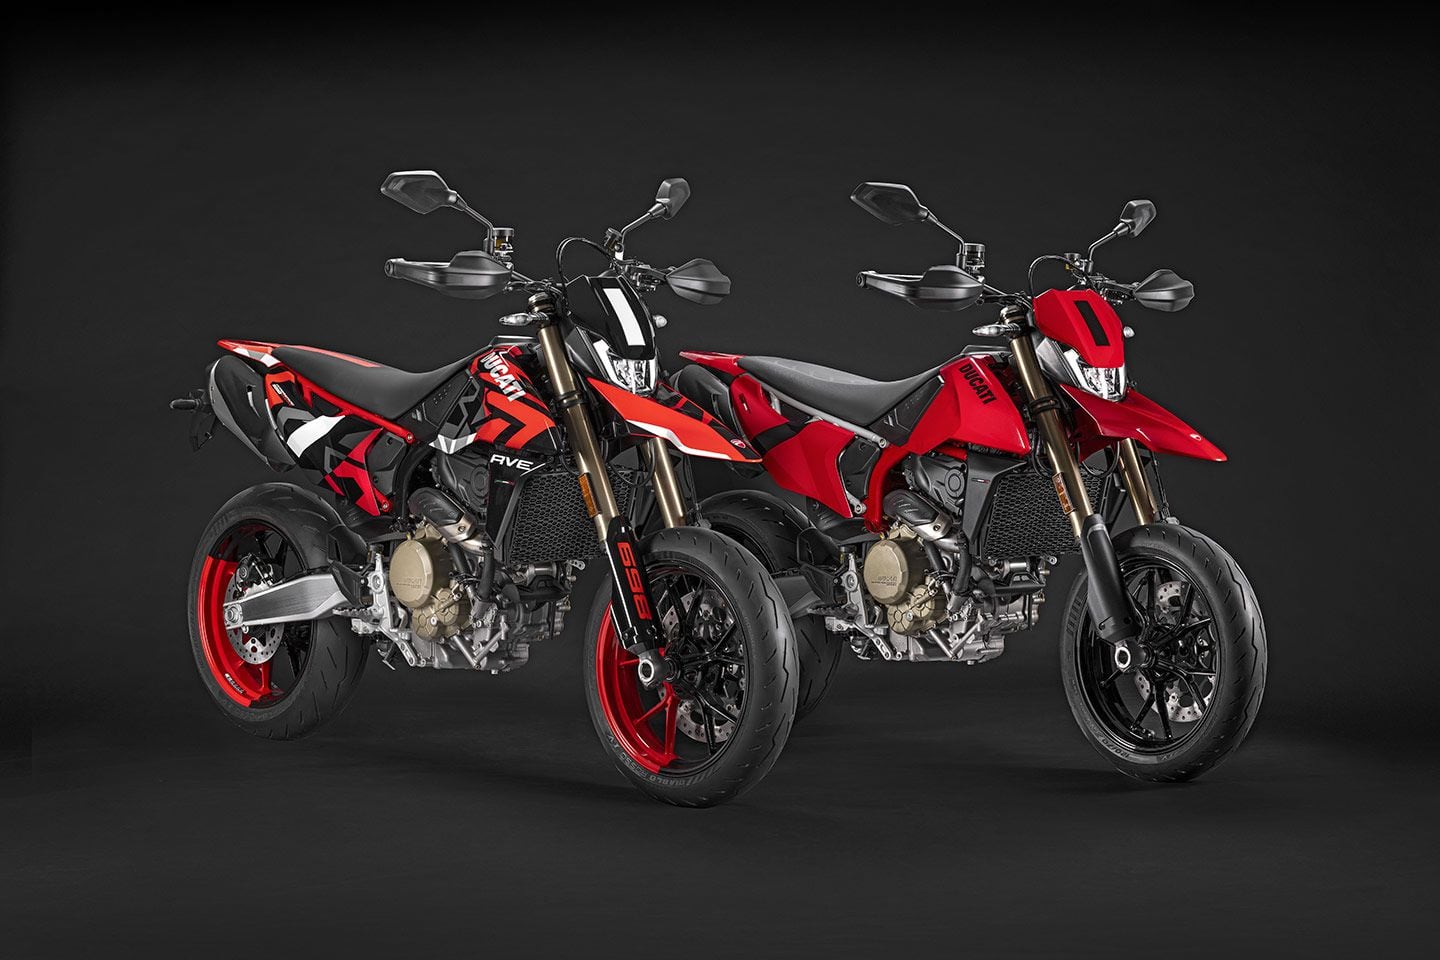 Two versions of the Hypermotard 698 Mono are available, the RVE gets graphics inspired by “street art.”